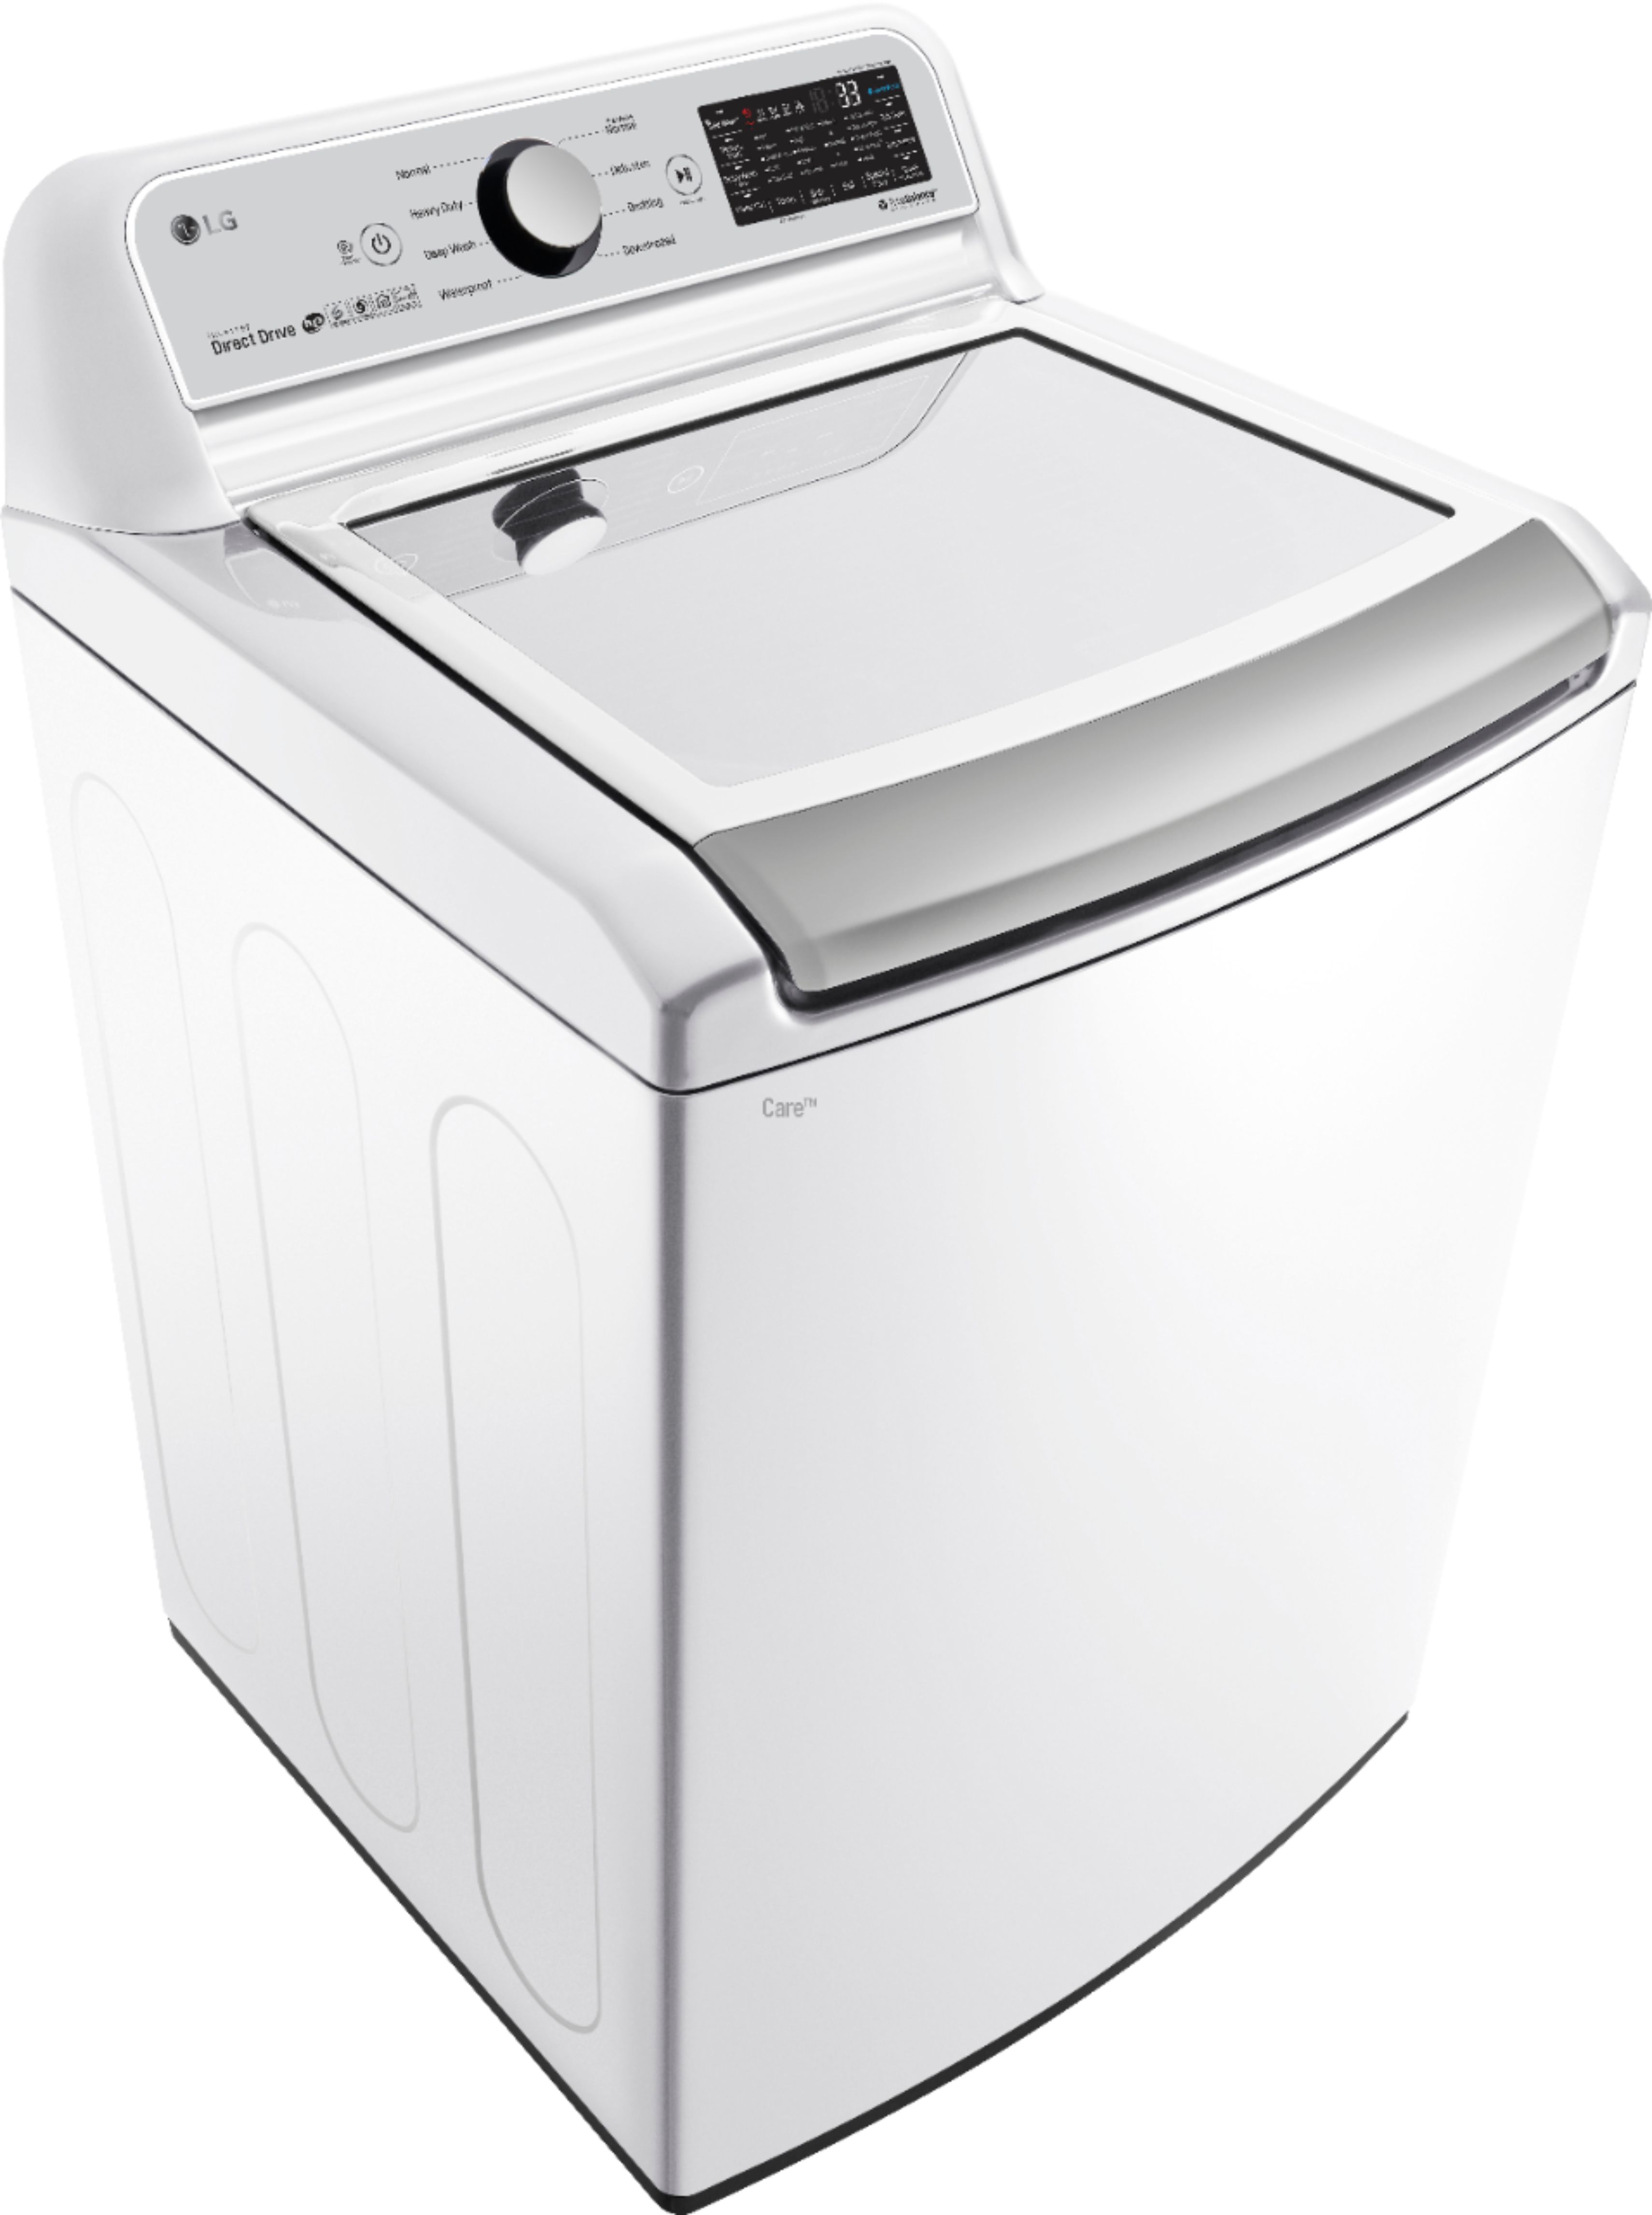 LG 5.0 Cu. Ft. High-Efficiency Top Load Washer with 6Motion Technology  White WT7150CW - Best Buy